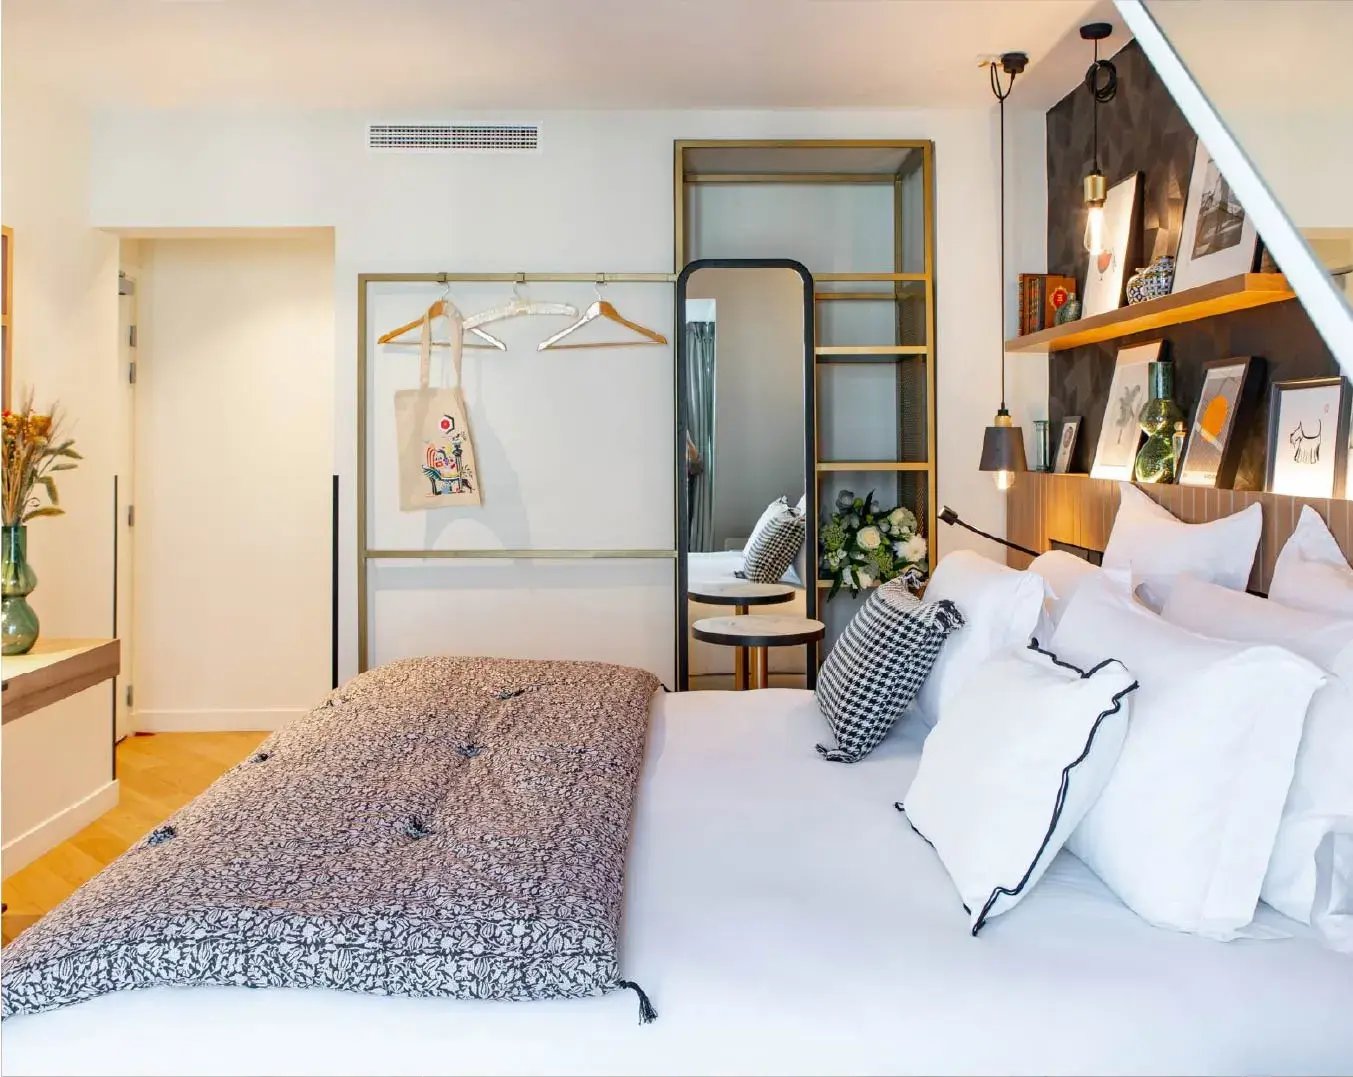 Maison Mère successfully sets the new standard of hospitality using Mews Website body Image 1 1076 x 1352-50 